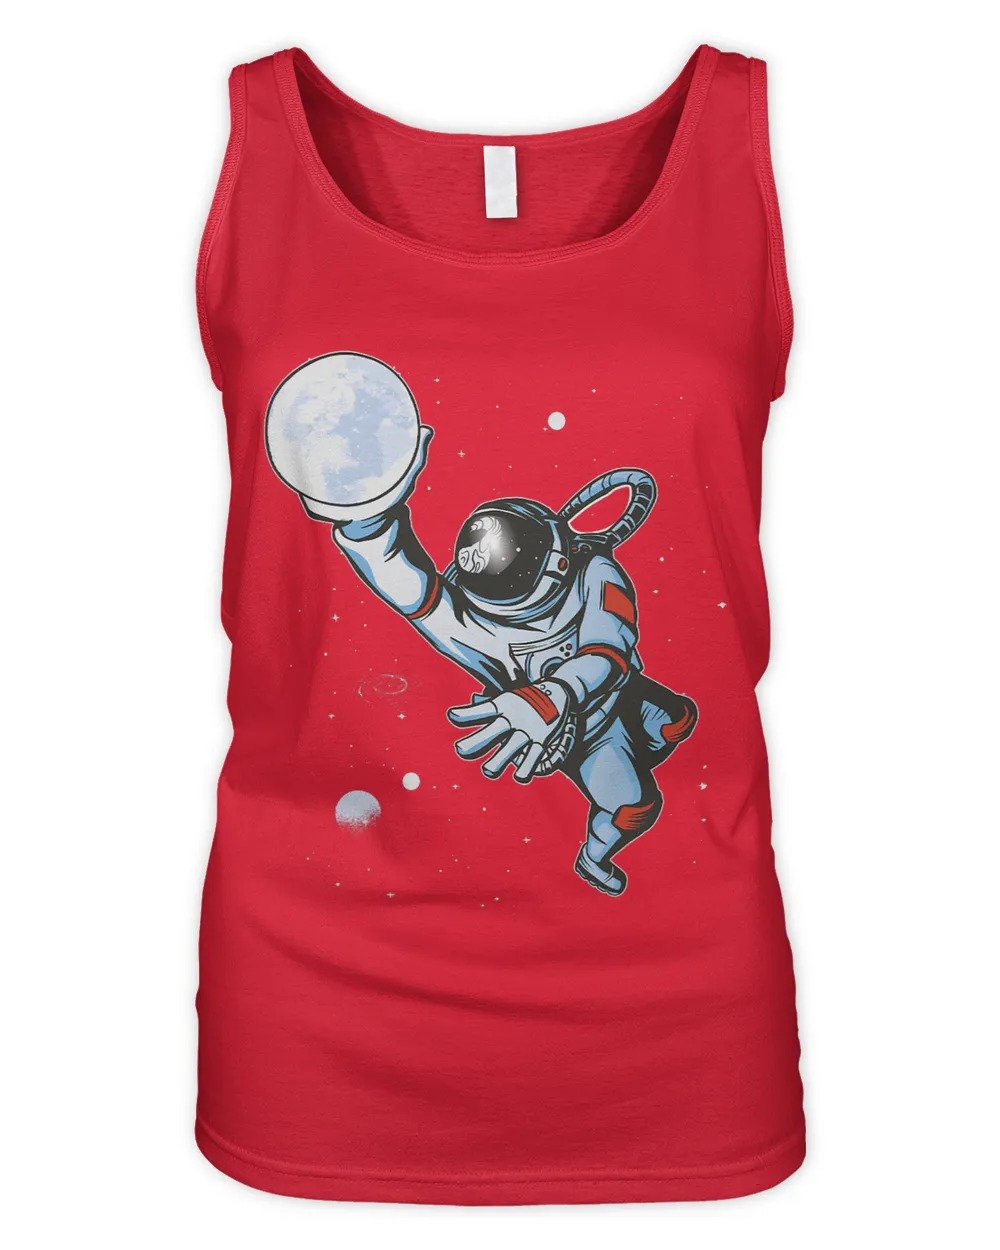 Basketball Gift Official Astronaut Basketball Player With Moon Space Suit